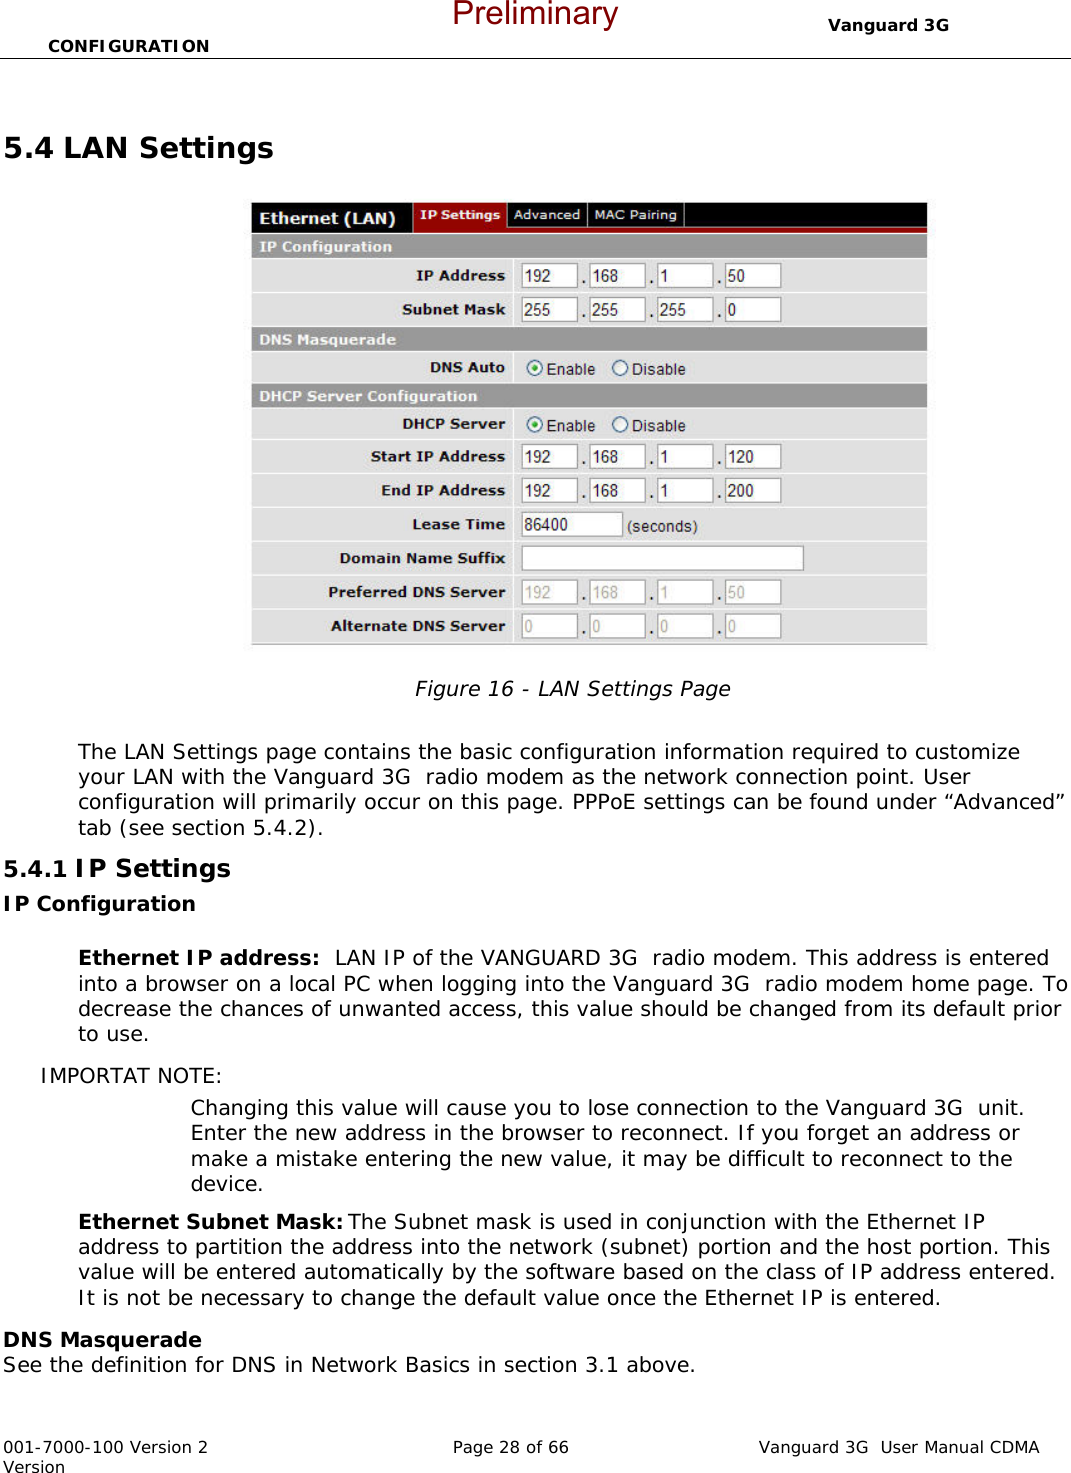                                  Vanguard 3G  CONFIGURATION  001-7000-100 Version 2       Page 28 of 66       Vanguard 3G  User Manual CDMA Version  5.4 LAN Settings  Figure 16 - LAN Settings Page  The LAN Settings page contains the basic configuration information required to customize your LAN with the Vanguard 3G  radio modem as the network connection point. User configuration will primarily occur on this page. PPPoE settings can be found under “Advanced” tab (see section 5.4.2). 5.4.1 IP Settings  IP Configuration  Ethernet IP address:  LAN IP of the VANGUARD 3G  radio modem. This address is entered into a browser on a local PC when logging into the Vanguard 3G  radio modem home page. To decrease the chances of unwanted access, this value should be changed from its default prior to use.   IMPORTAT NOTE:   Changing this value will cause you to lose connection to the Vanguard 3G  unit. Enter the new address in the browser to reconnect. If you forget an address or make a mistake entering the new value, it may be difficult to reconnect to the device.   Ethernet Subnet Mask: The Subnet mask is used in conjunction with the Ethernet IP address to partition the address into the network (subnet) portion and the host portion. This value will be entered automatically by the software based on the class of IP address entered.  It is not be necessary to change the default value once the Ethernet IP is entered.   DNS Masquerade  See the definition for DNS in Network Basics in section 3.1 above. Preliminary